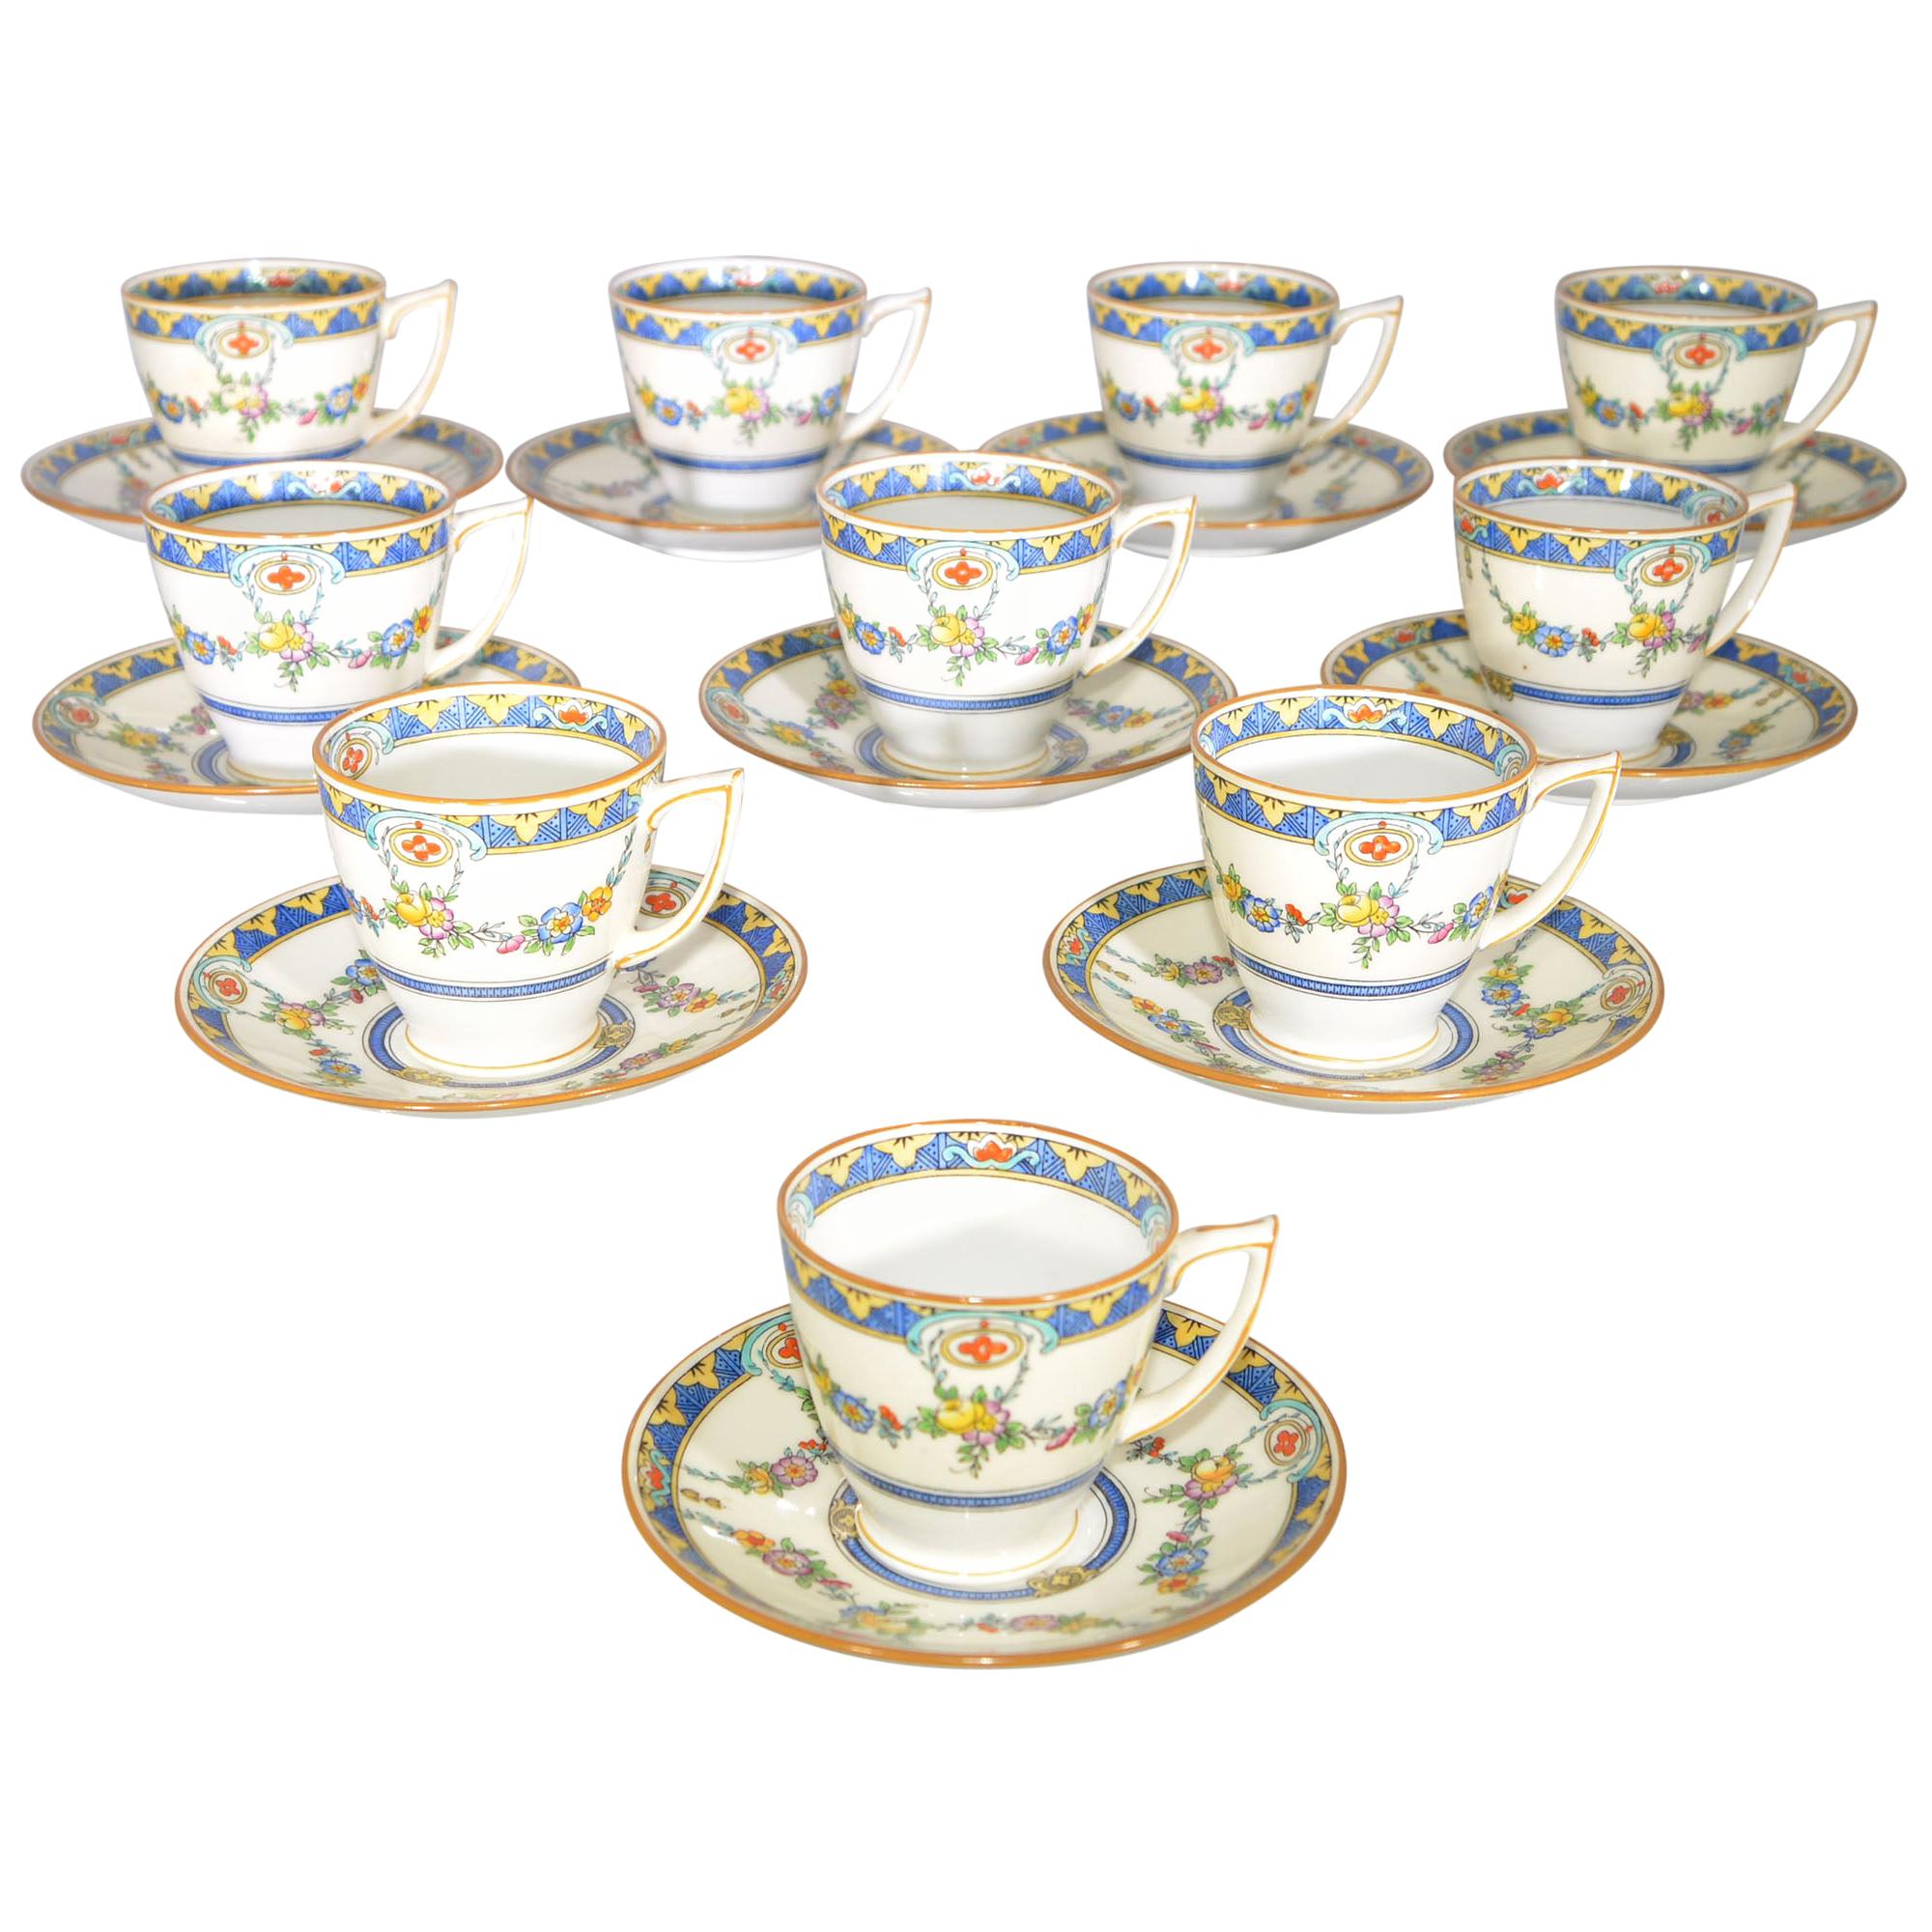 Mintons Princess Demitasse Cups and Saucers 20 Pieces For Sale